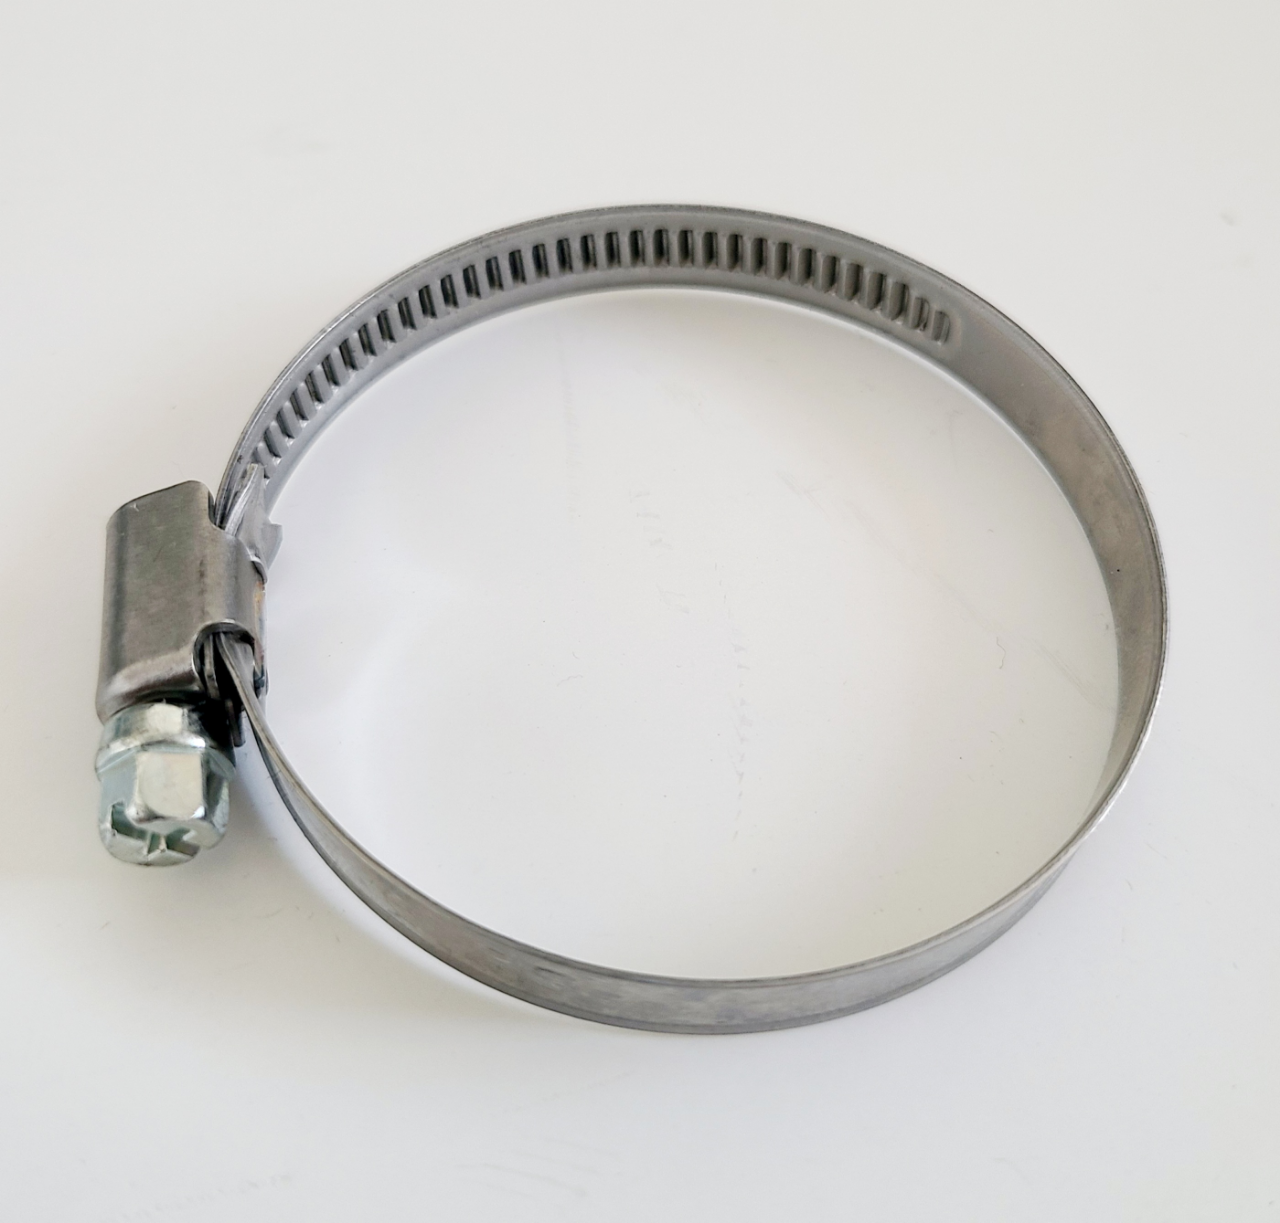 Euro-Style Hose Clamp - Carb Intake, CR125, Rotax, TM, Rok (32-50mm)